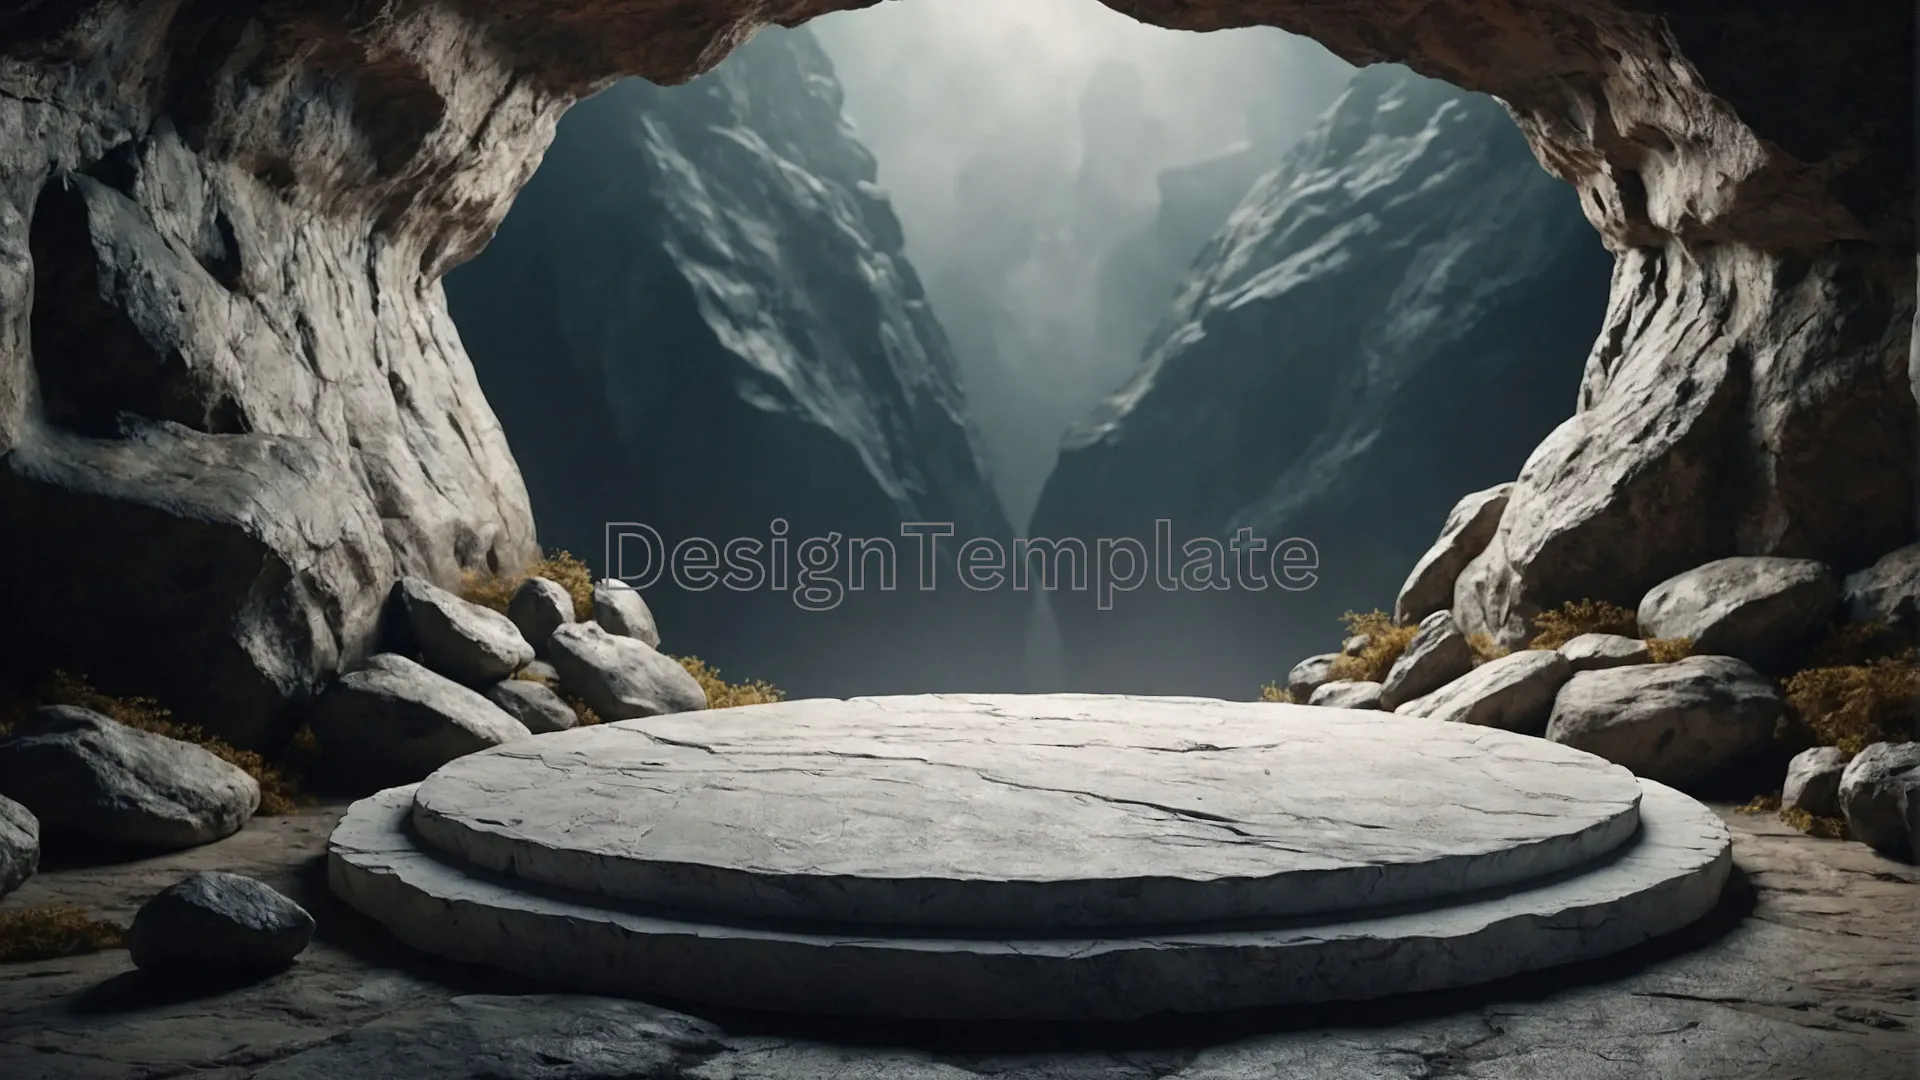 High-Quality PNG Image of a Mountain Cave Stone Theme Circle Podium